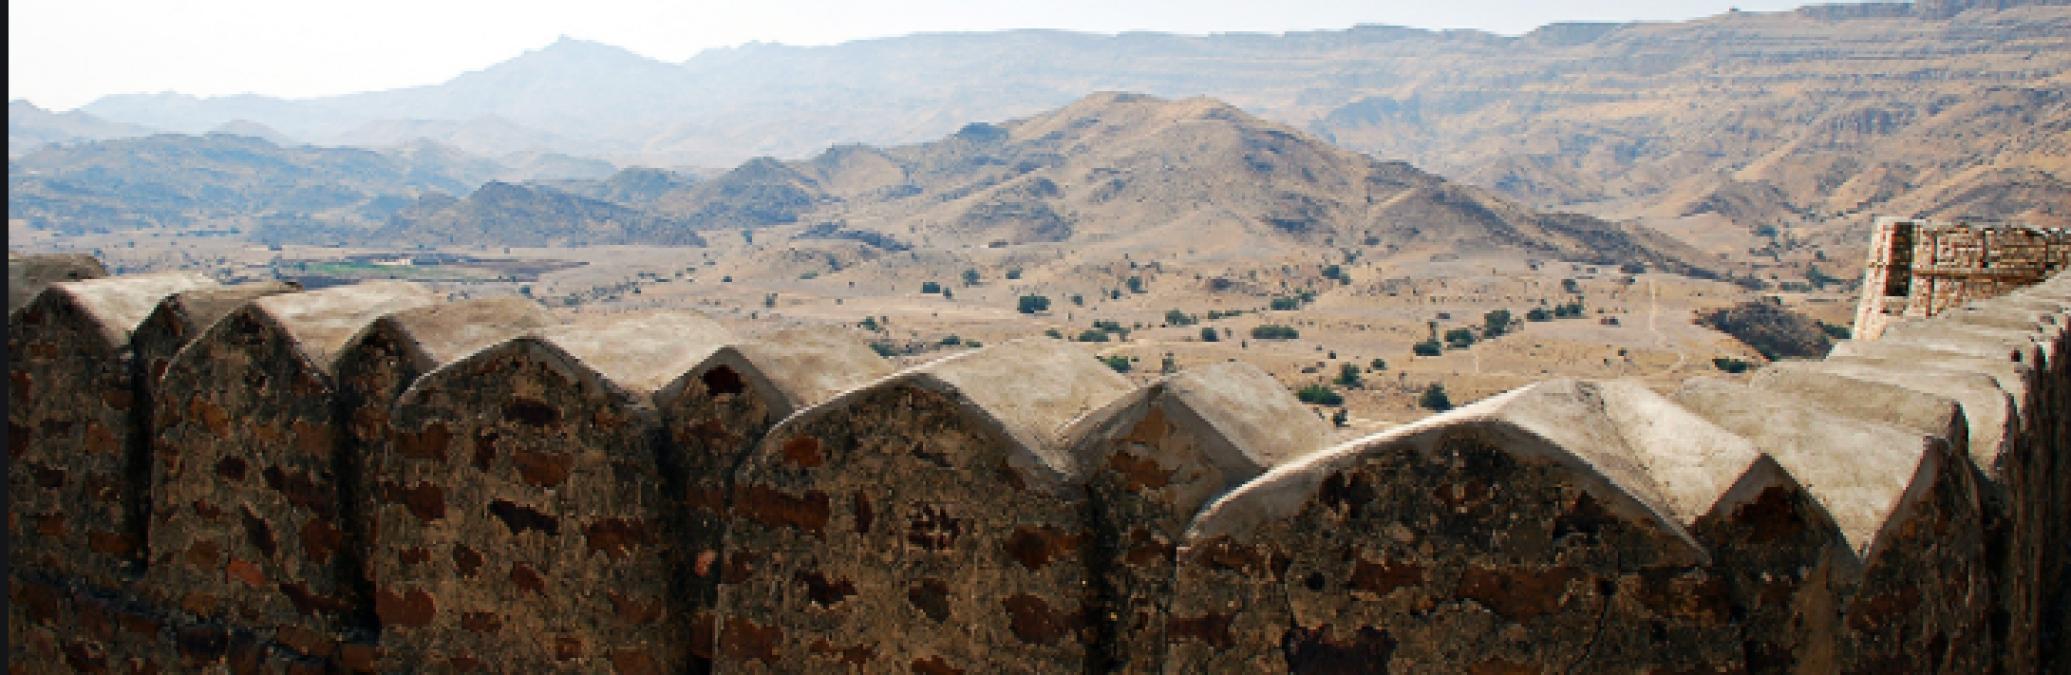 Mysterious Ranikot Pakistan's fort is the world's largest fort, know more